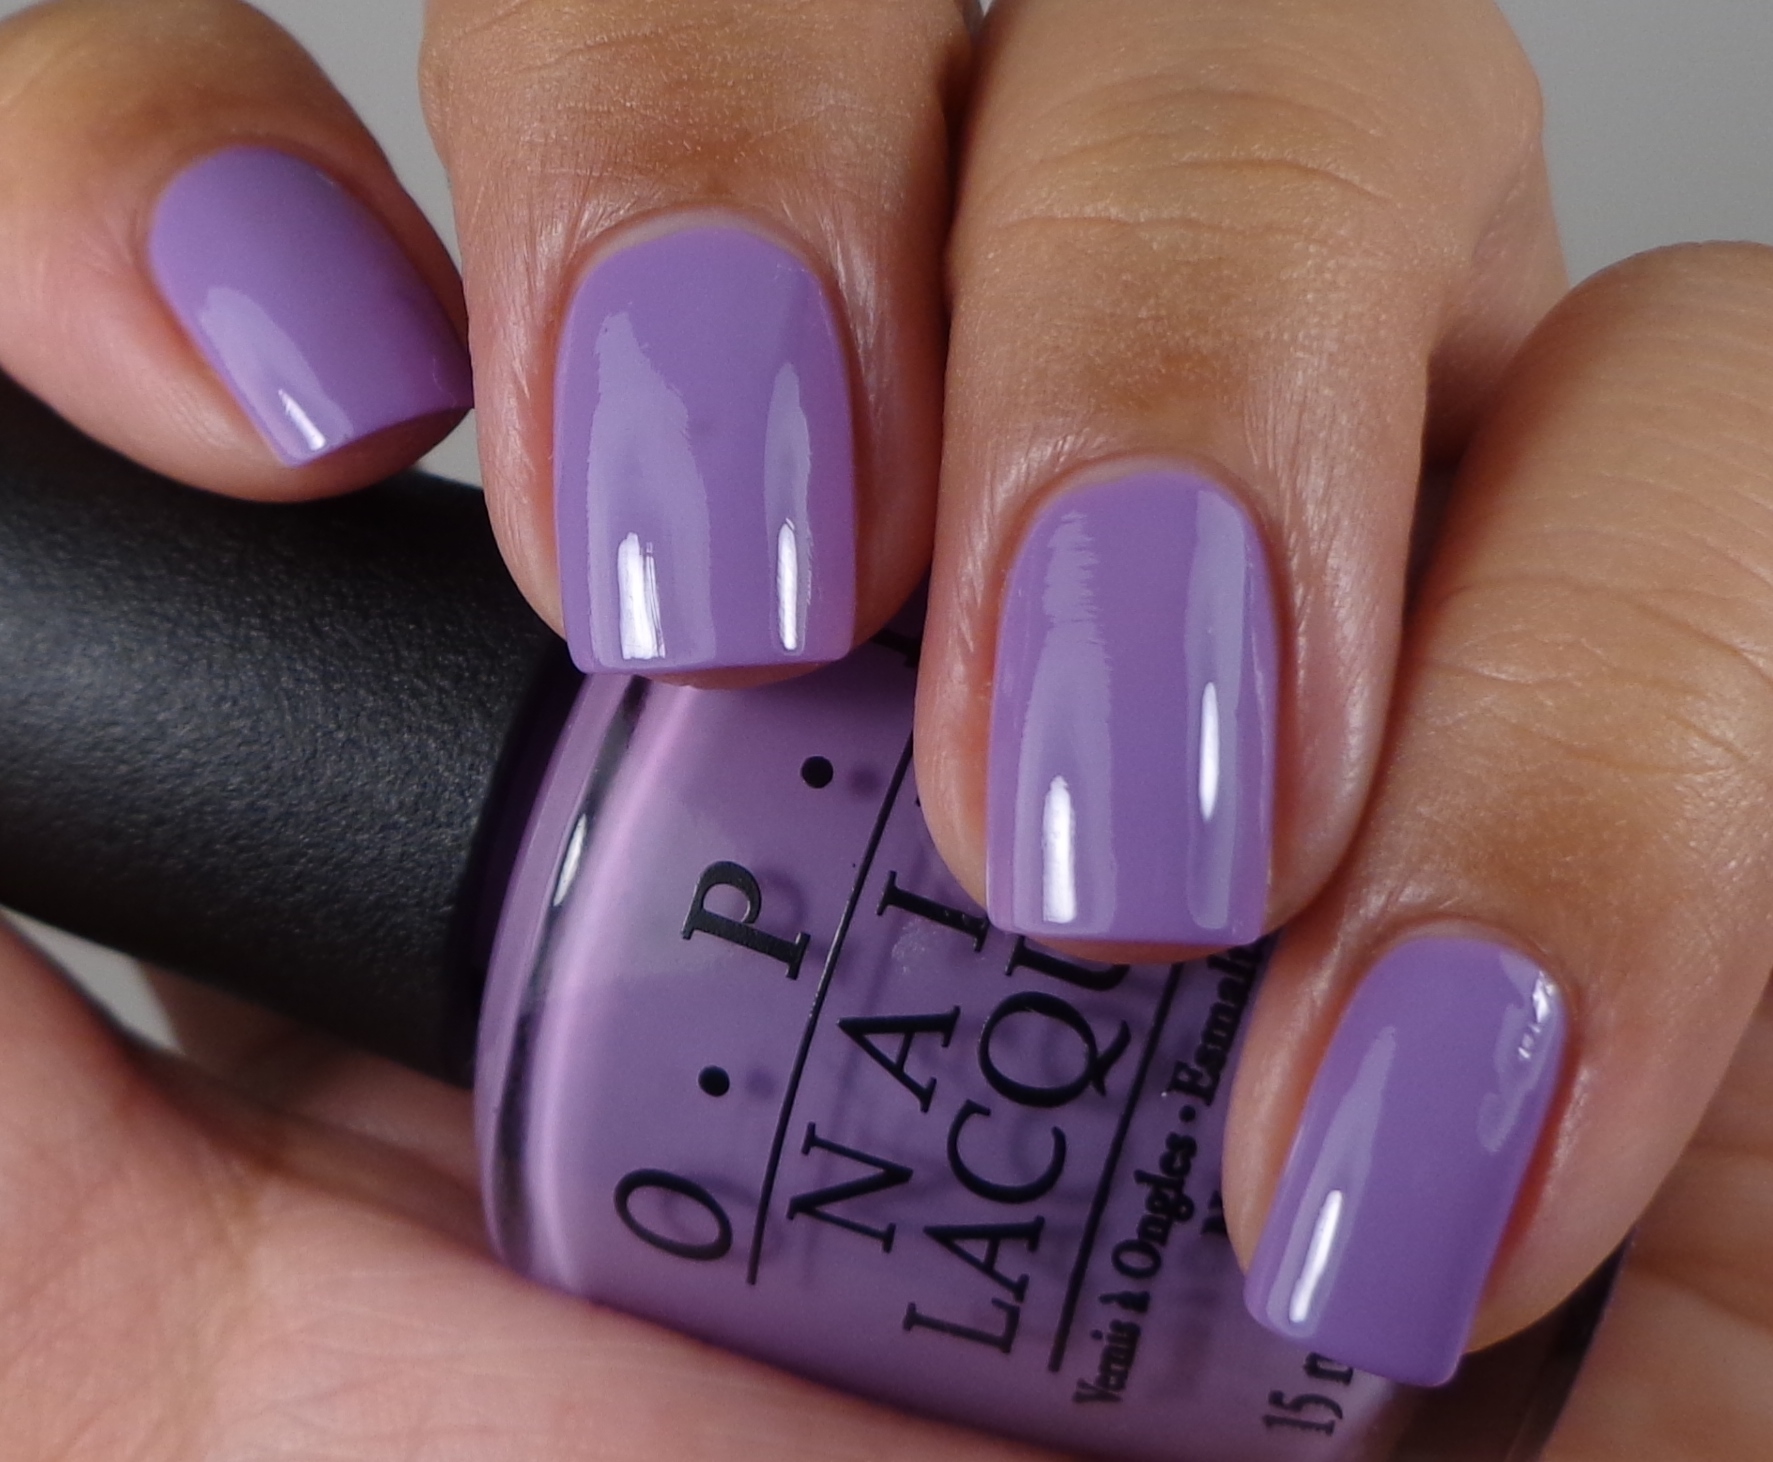 1. OPI Nail Lacquer in "Do You Lilac It?" - wide 6